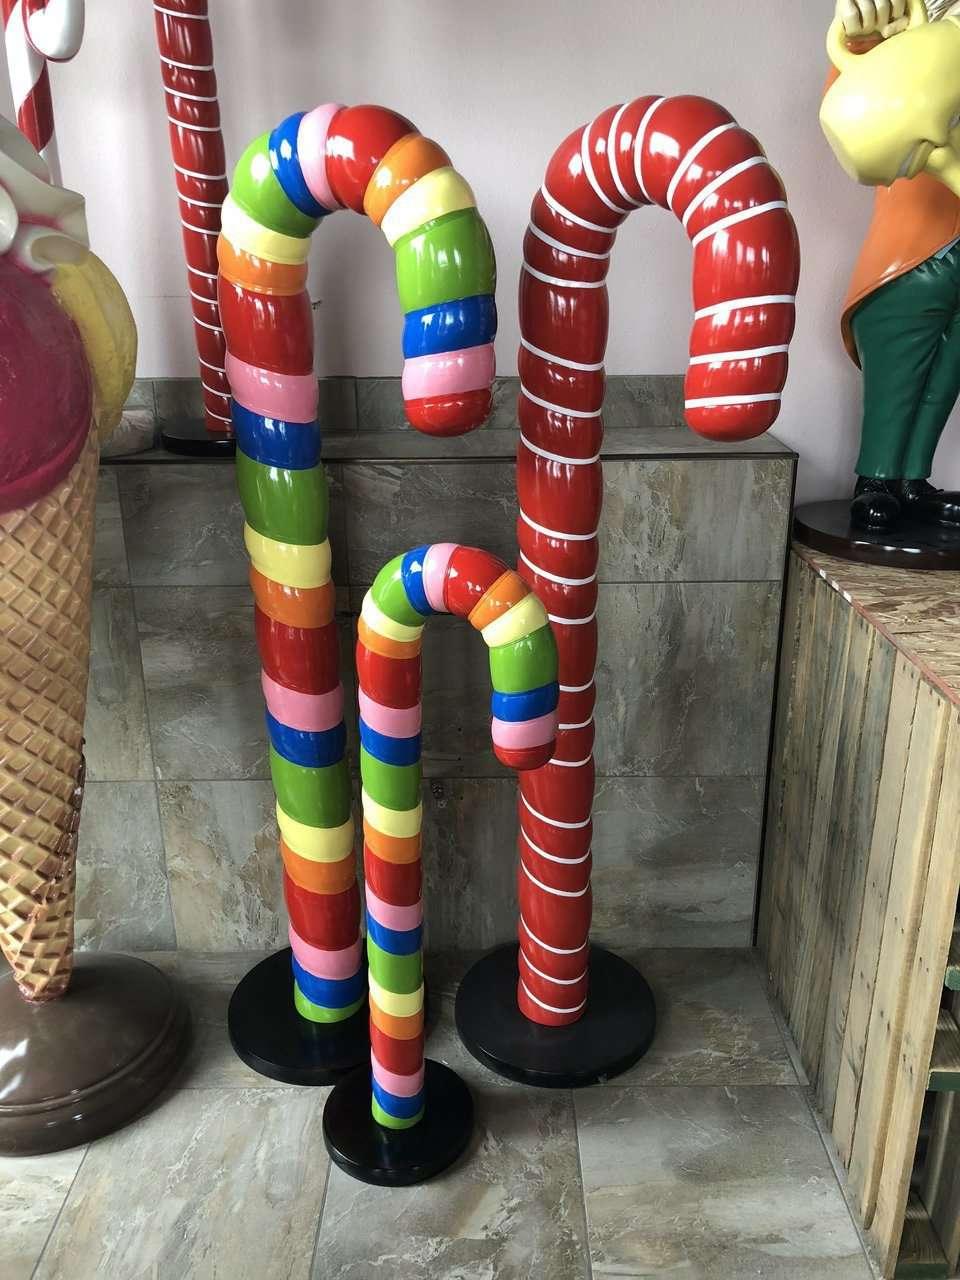 Large Rainbow Cushion Candy Cane Statue - LM Treasures Prop Rentals 